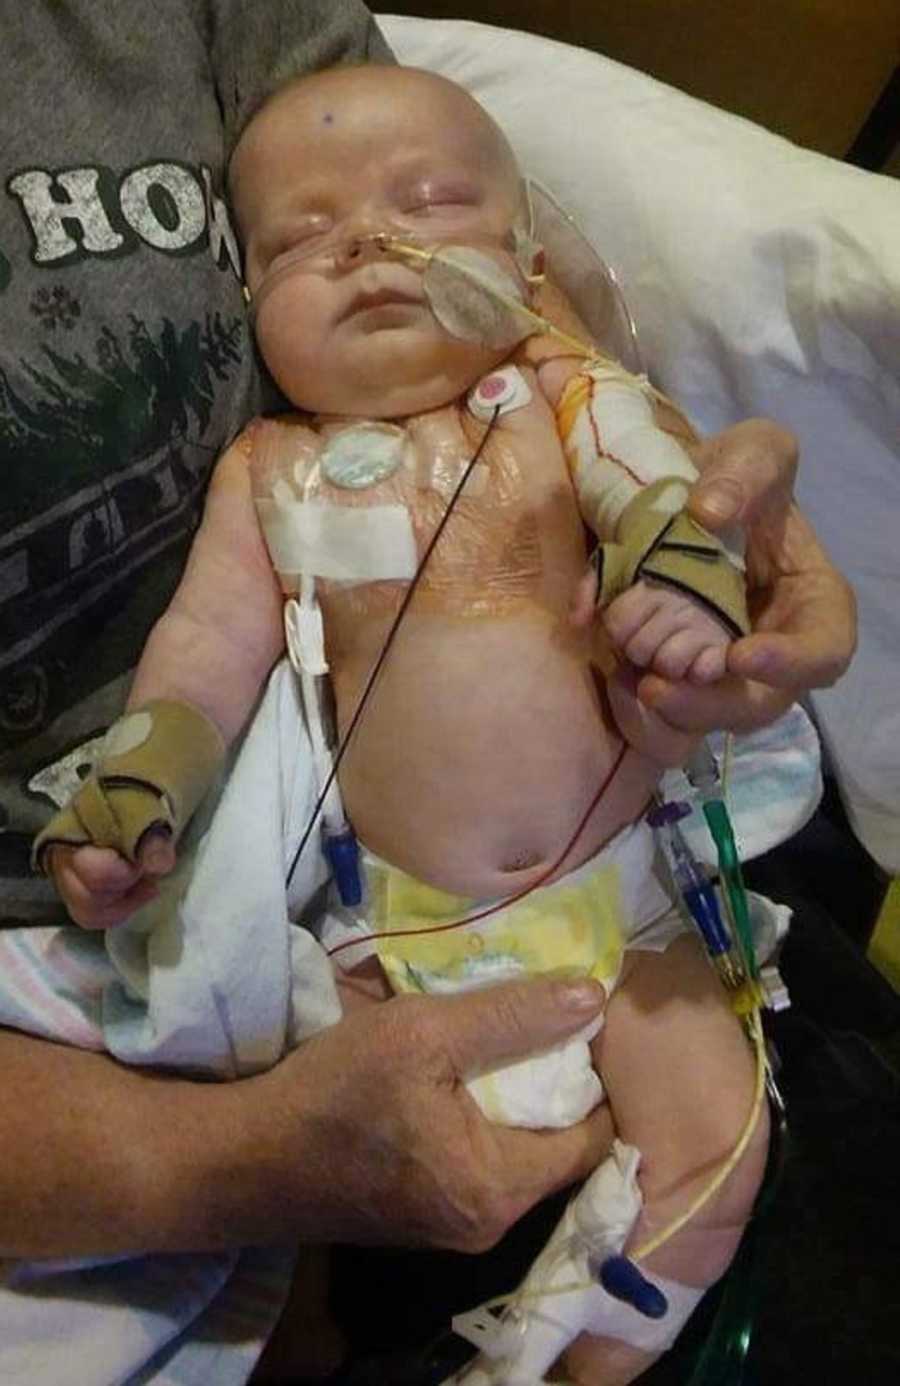 Newborn with brain cancer lays in adult's arms as he is hooked up to monitor's